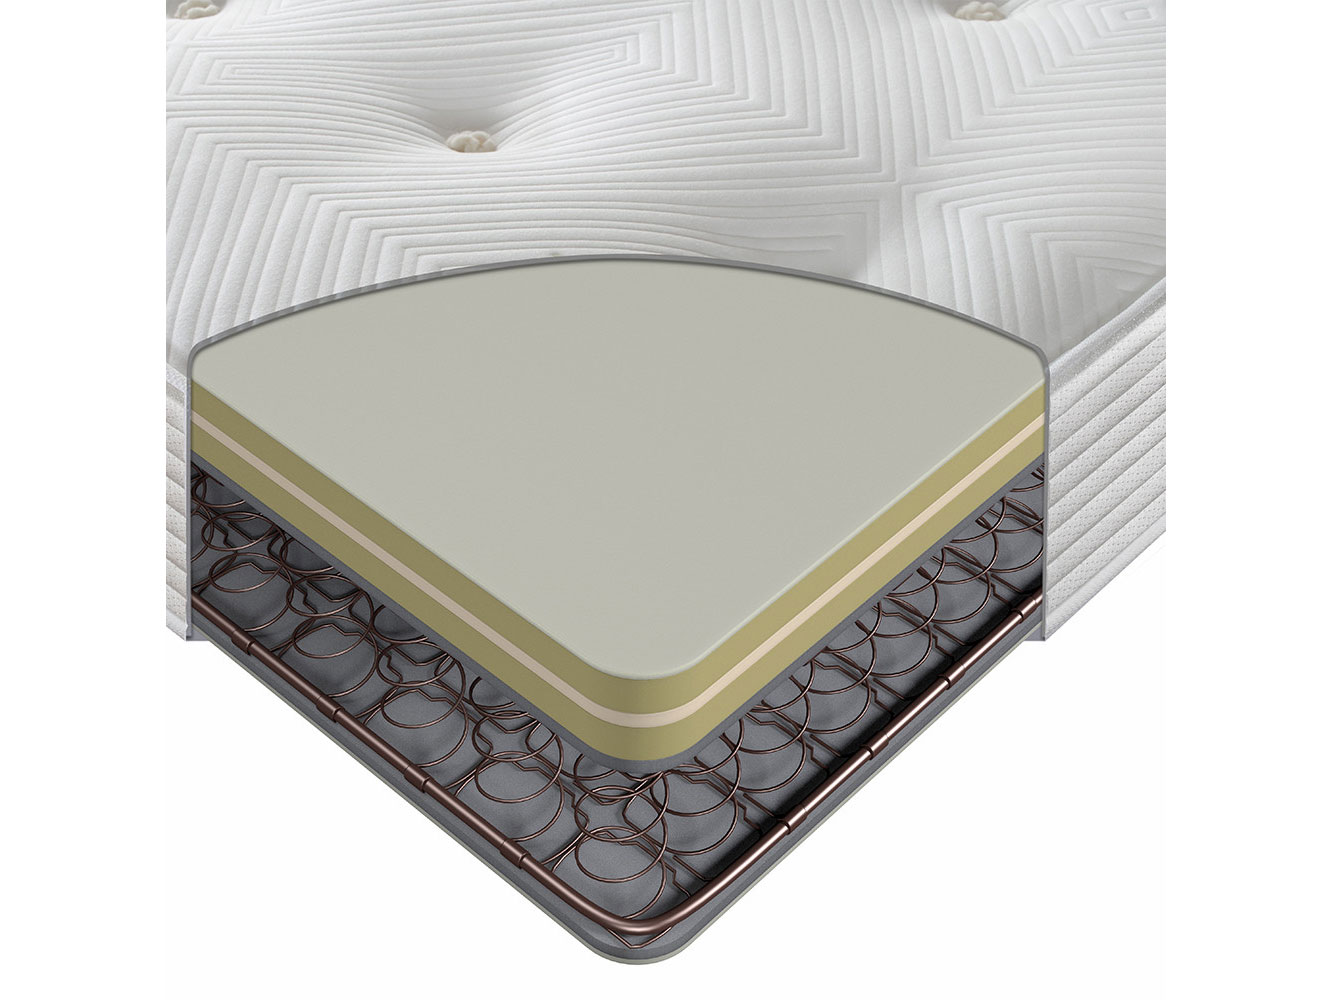 6ft Super King Size Sealy ActivSleep Ortho Extra Firm